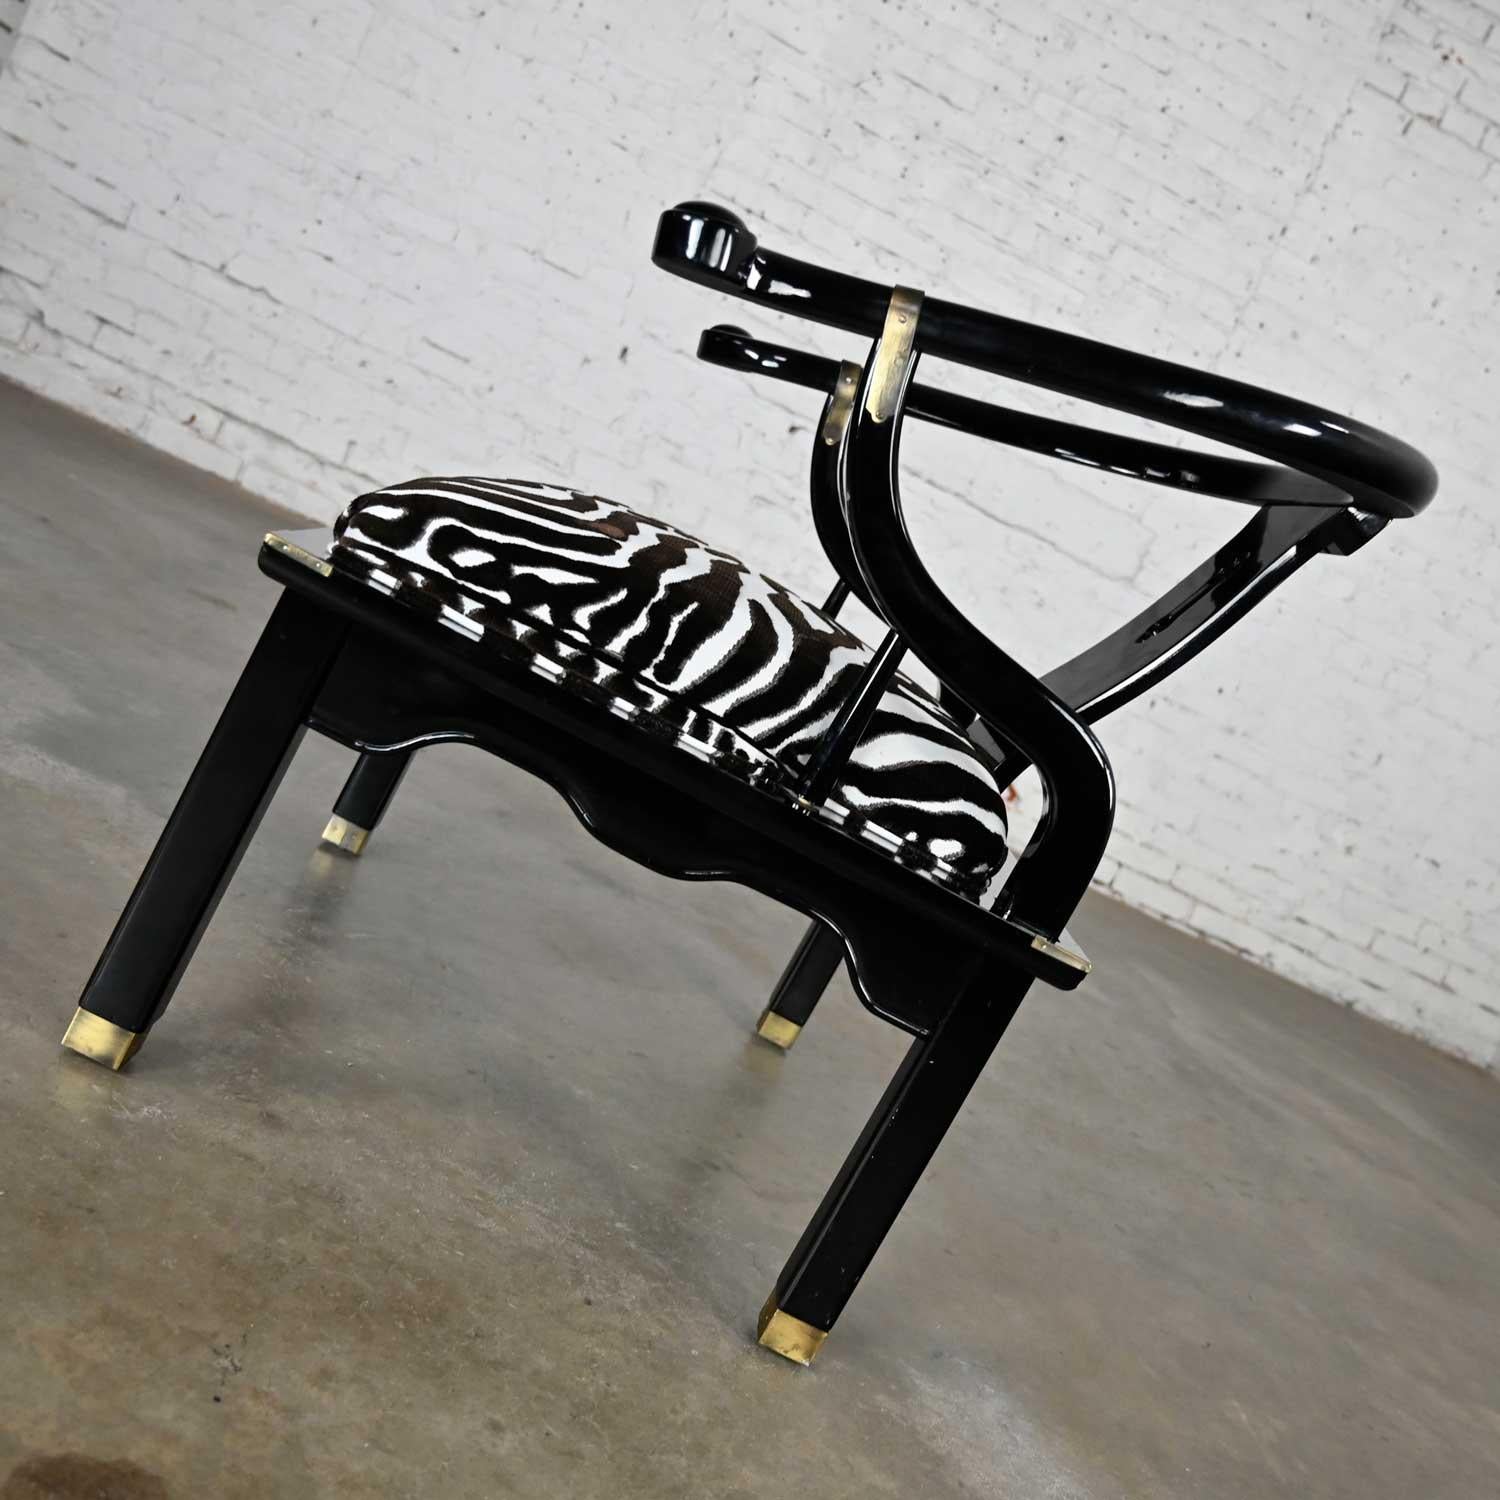 Ming Style Black Lacquer & Brass Low Chair After James Mont Scalamandre Zebra  In Good Condition For Sale In Topeka, KS